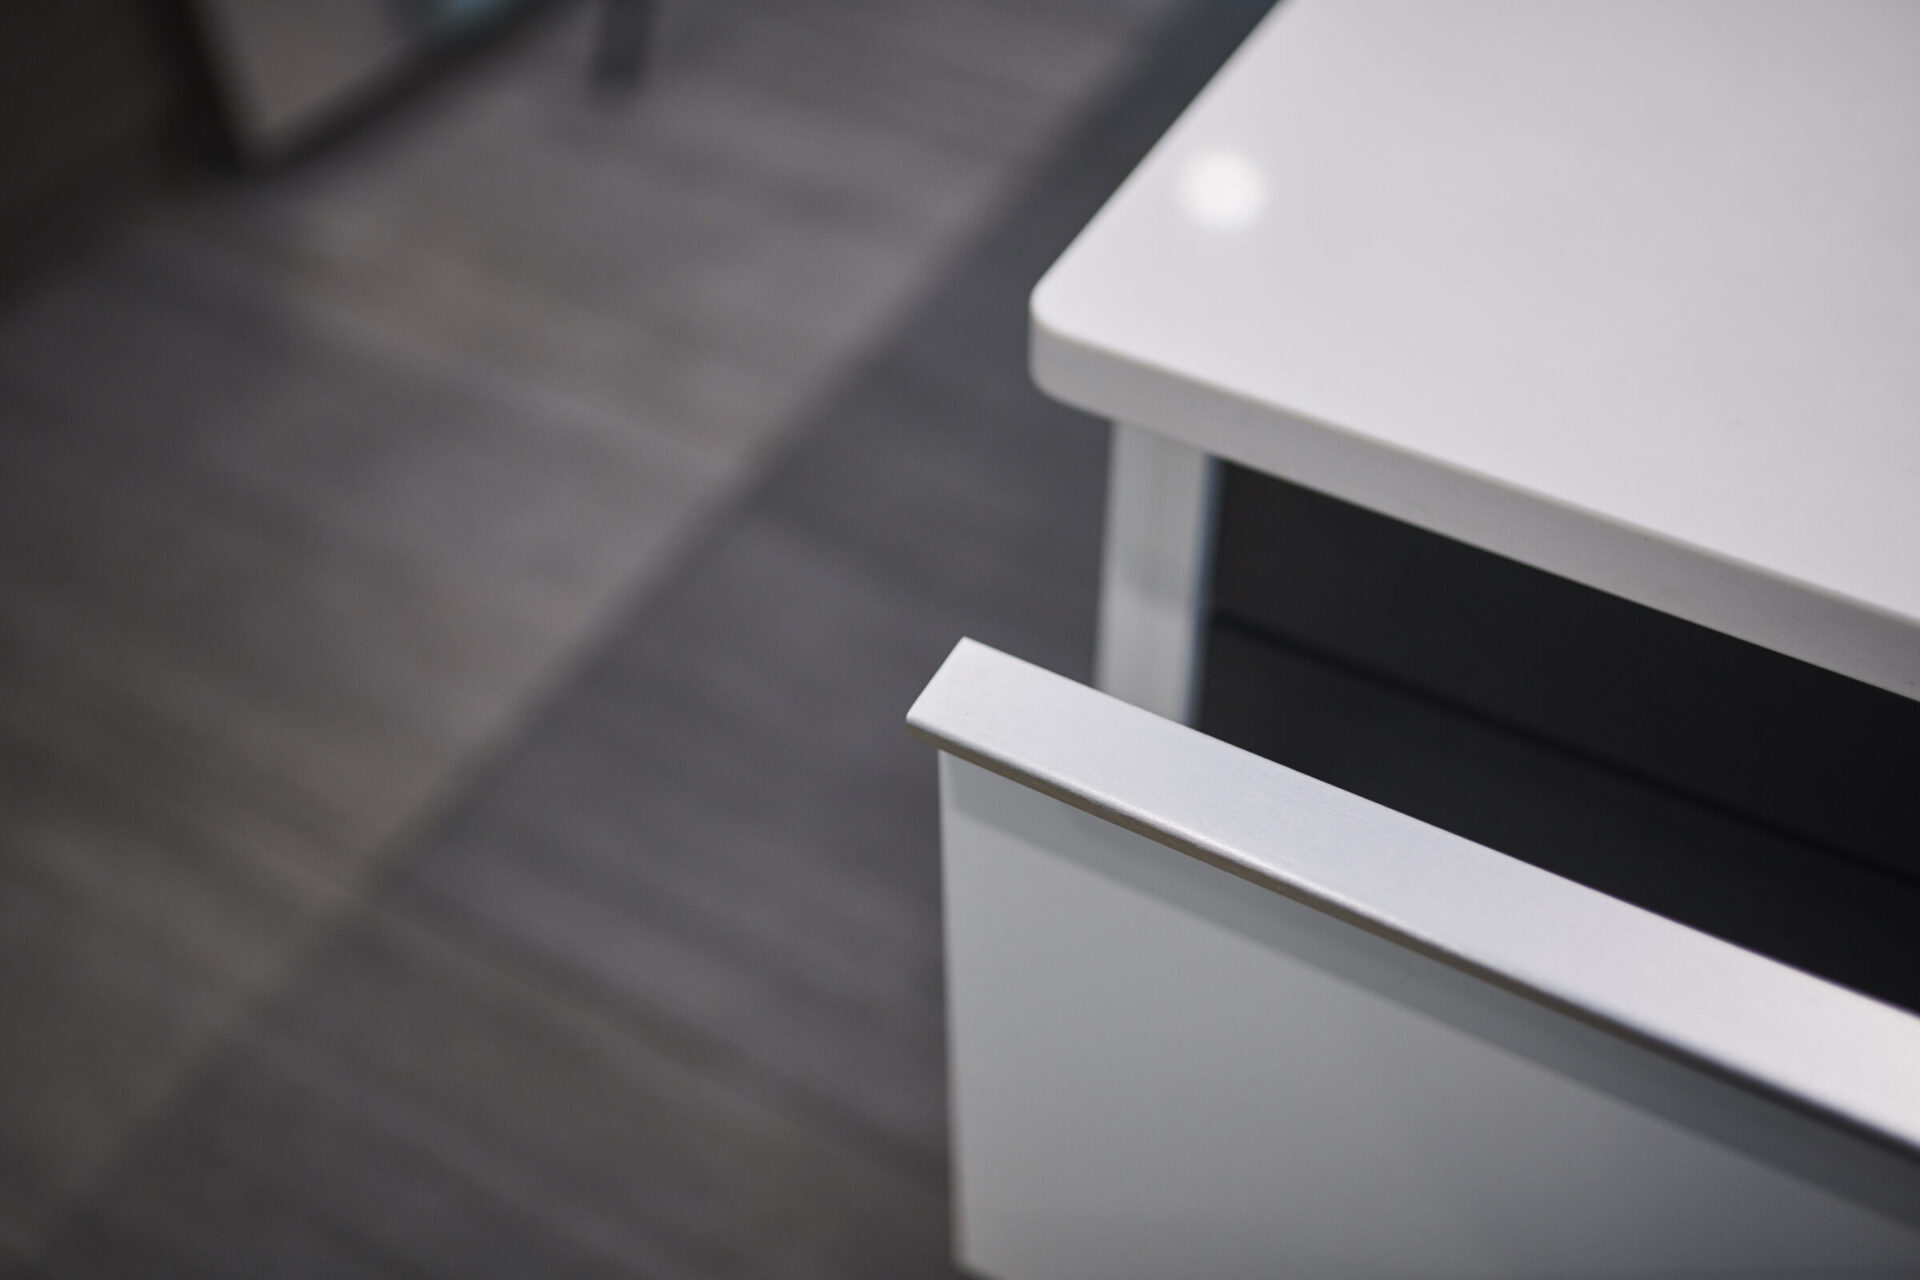 A modern, white drawer is partially open, revealing a black interior, with a blurred background showing a grey tiled floor and cabinet.